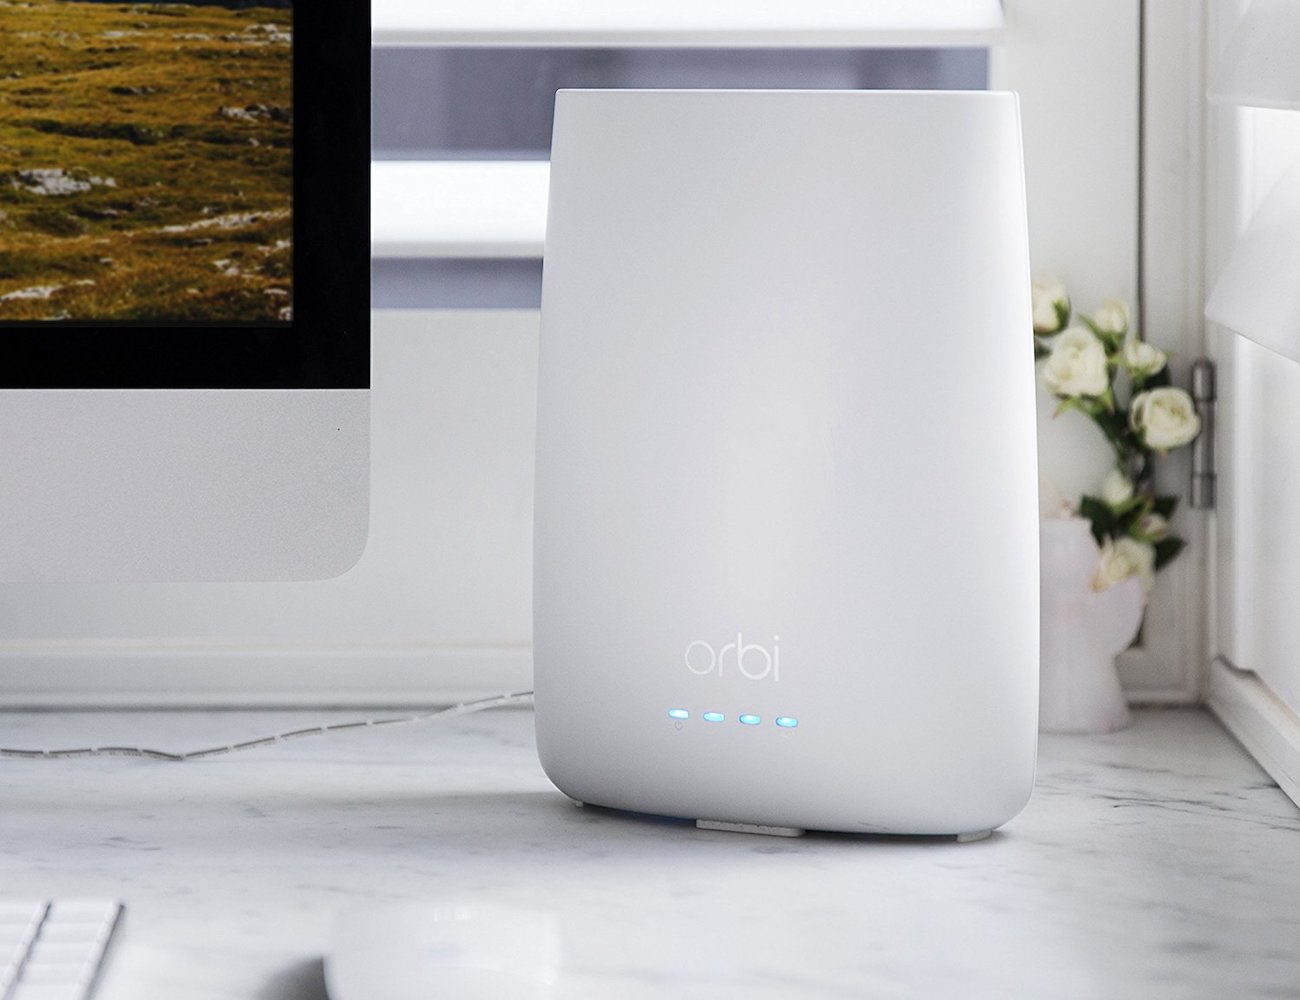 Netgear Orbi Tri-Band Cable Modem Router